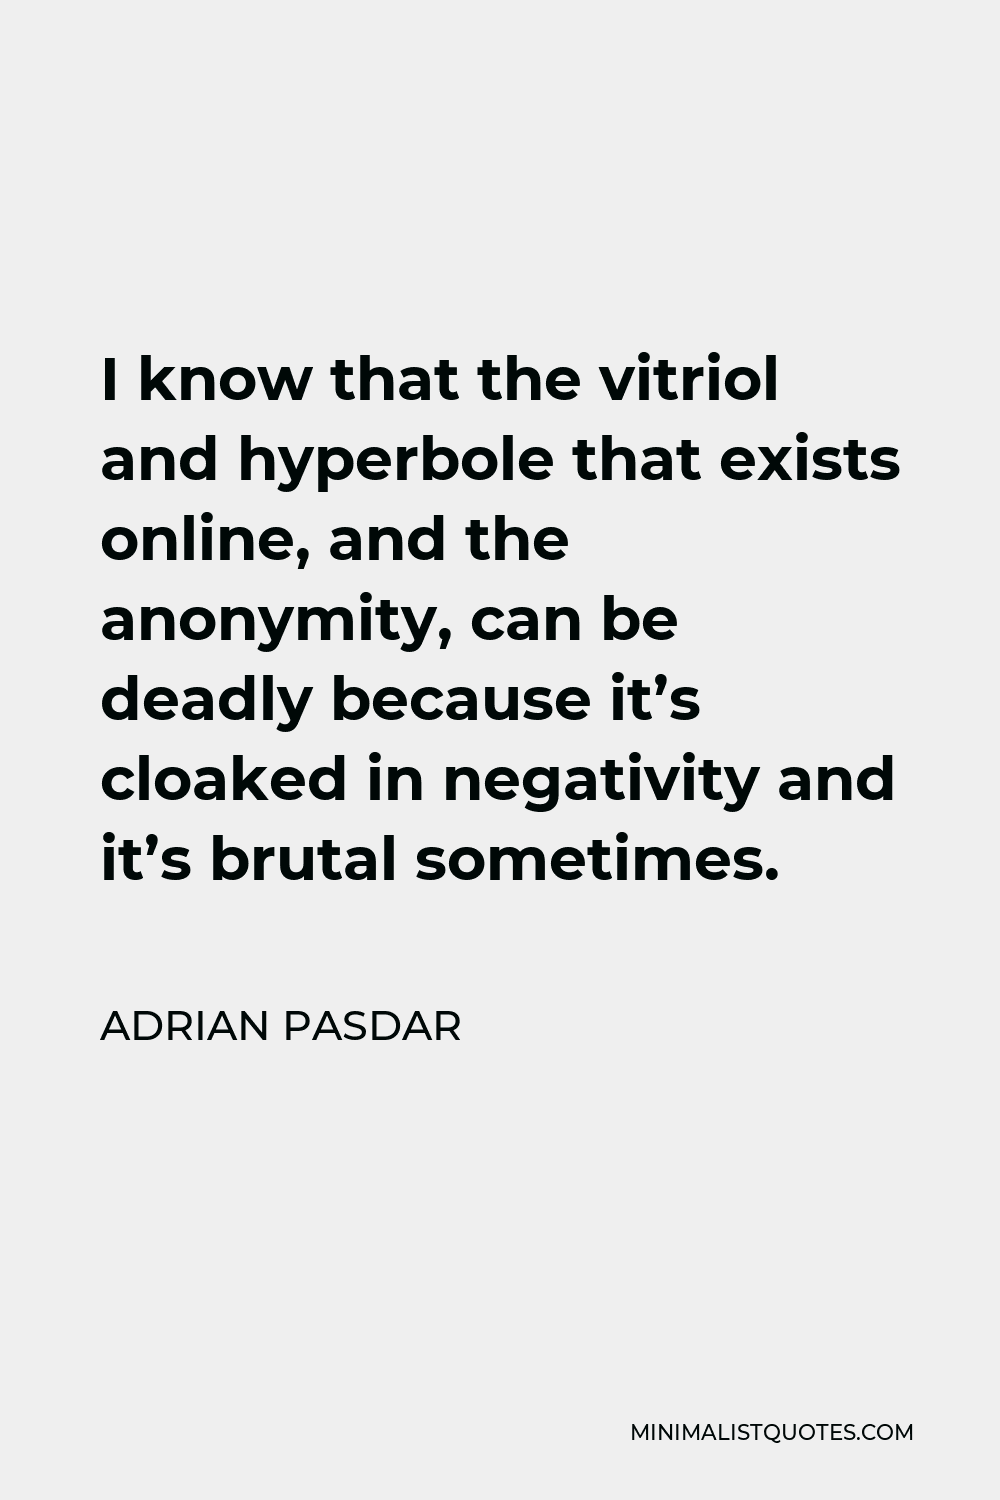 Adrian Pasdar Quote - I know that the vitriol and hyperbole that exists online, and the anonymity, can be deadly because it’s cloaked in negativity and it’s brutal sometimes.